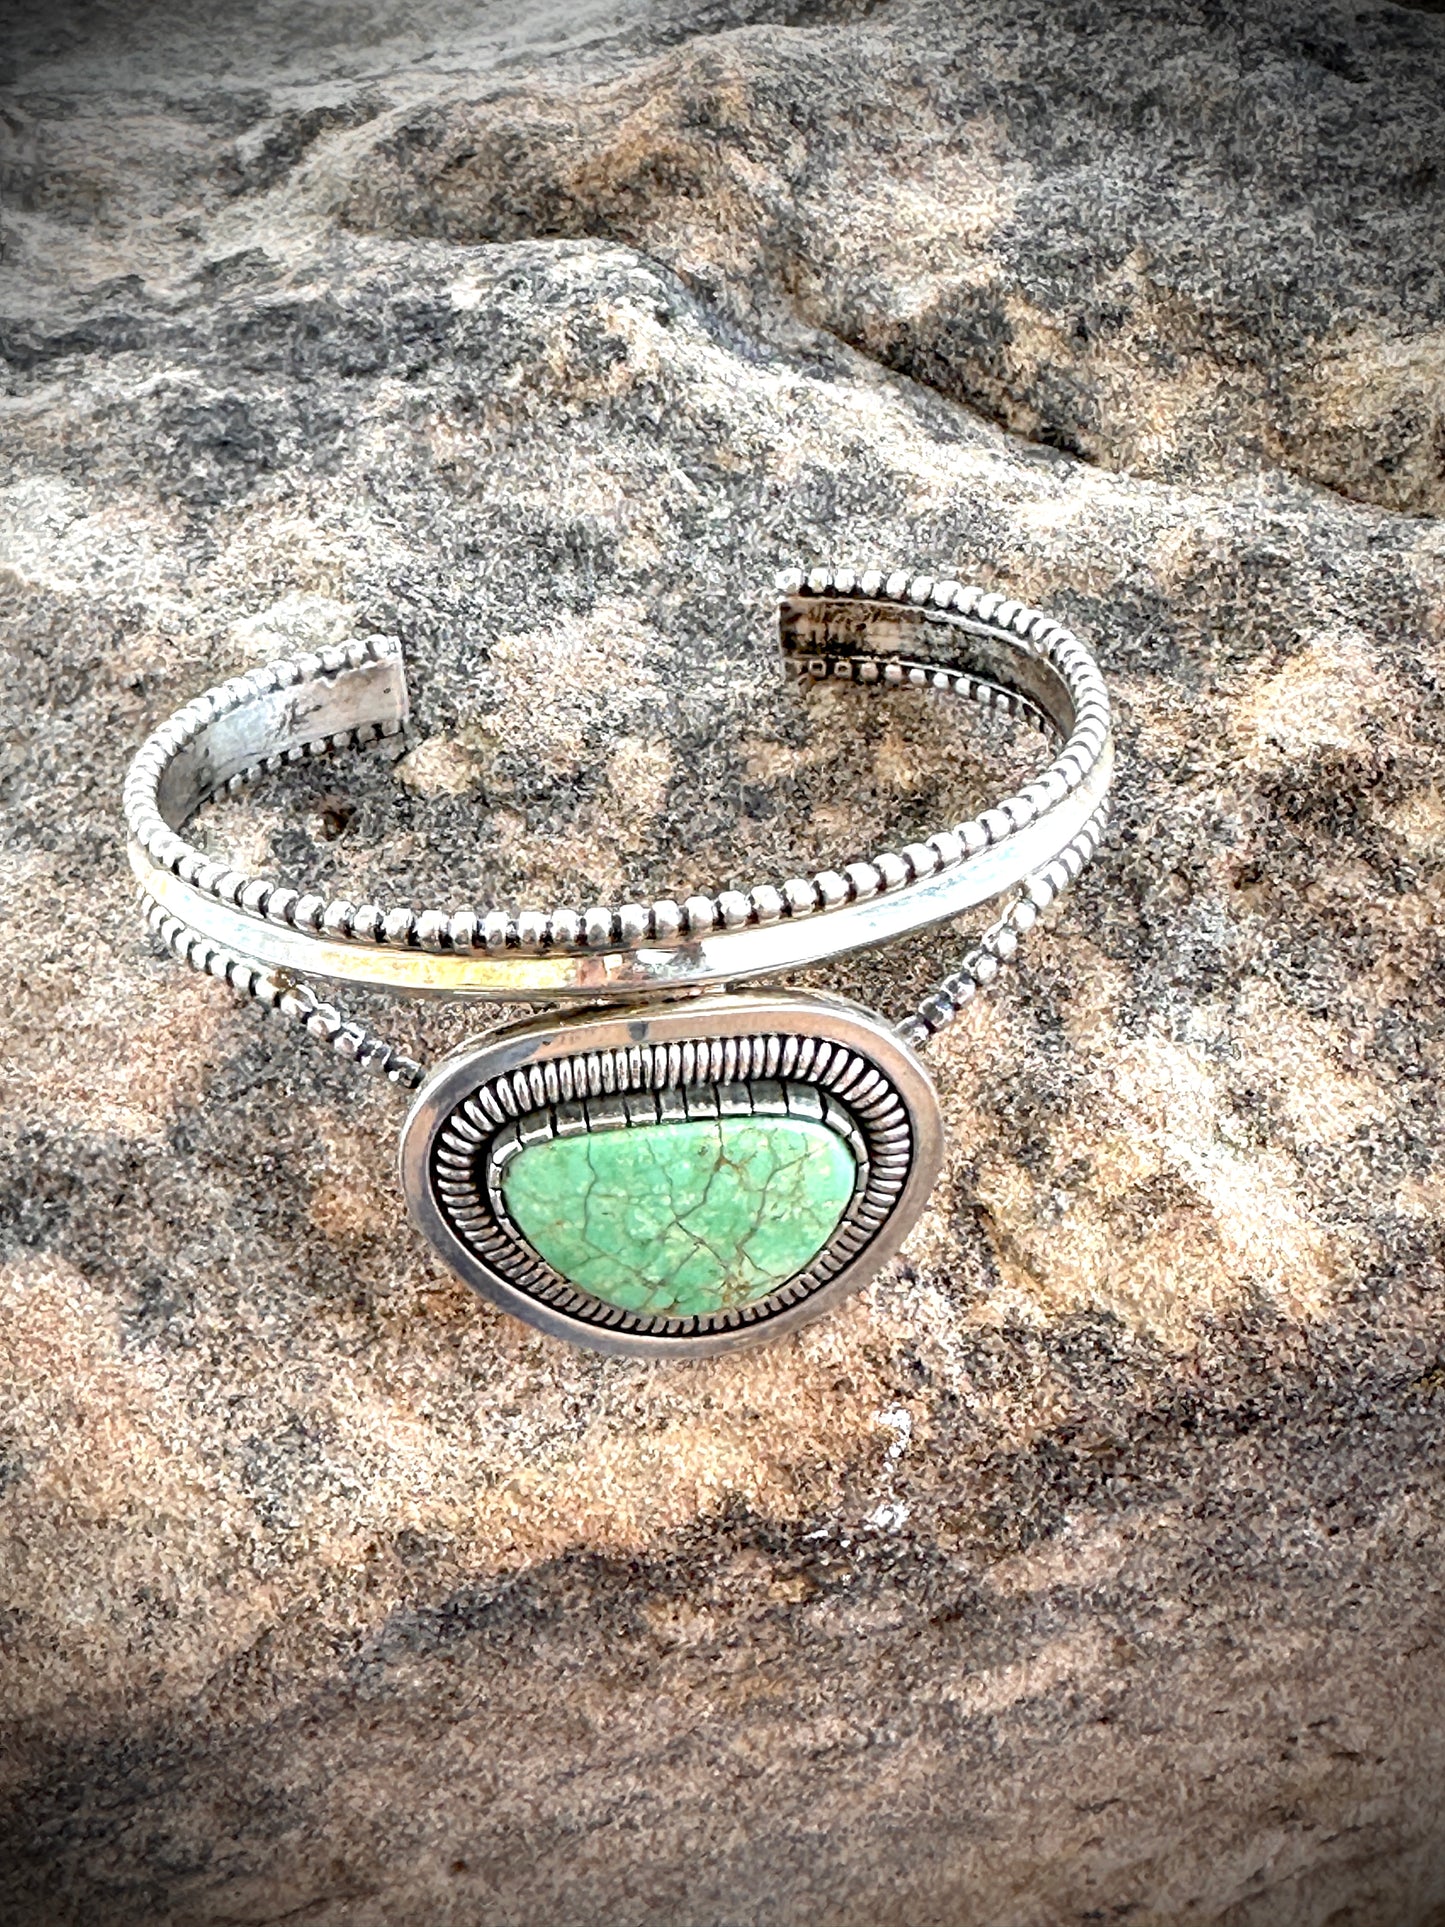 Down South Green Turquoise Cuff